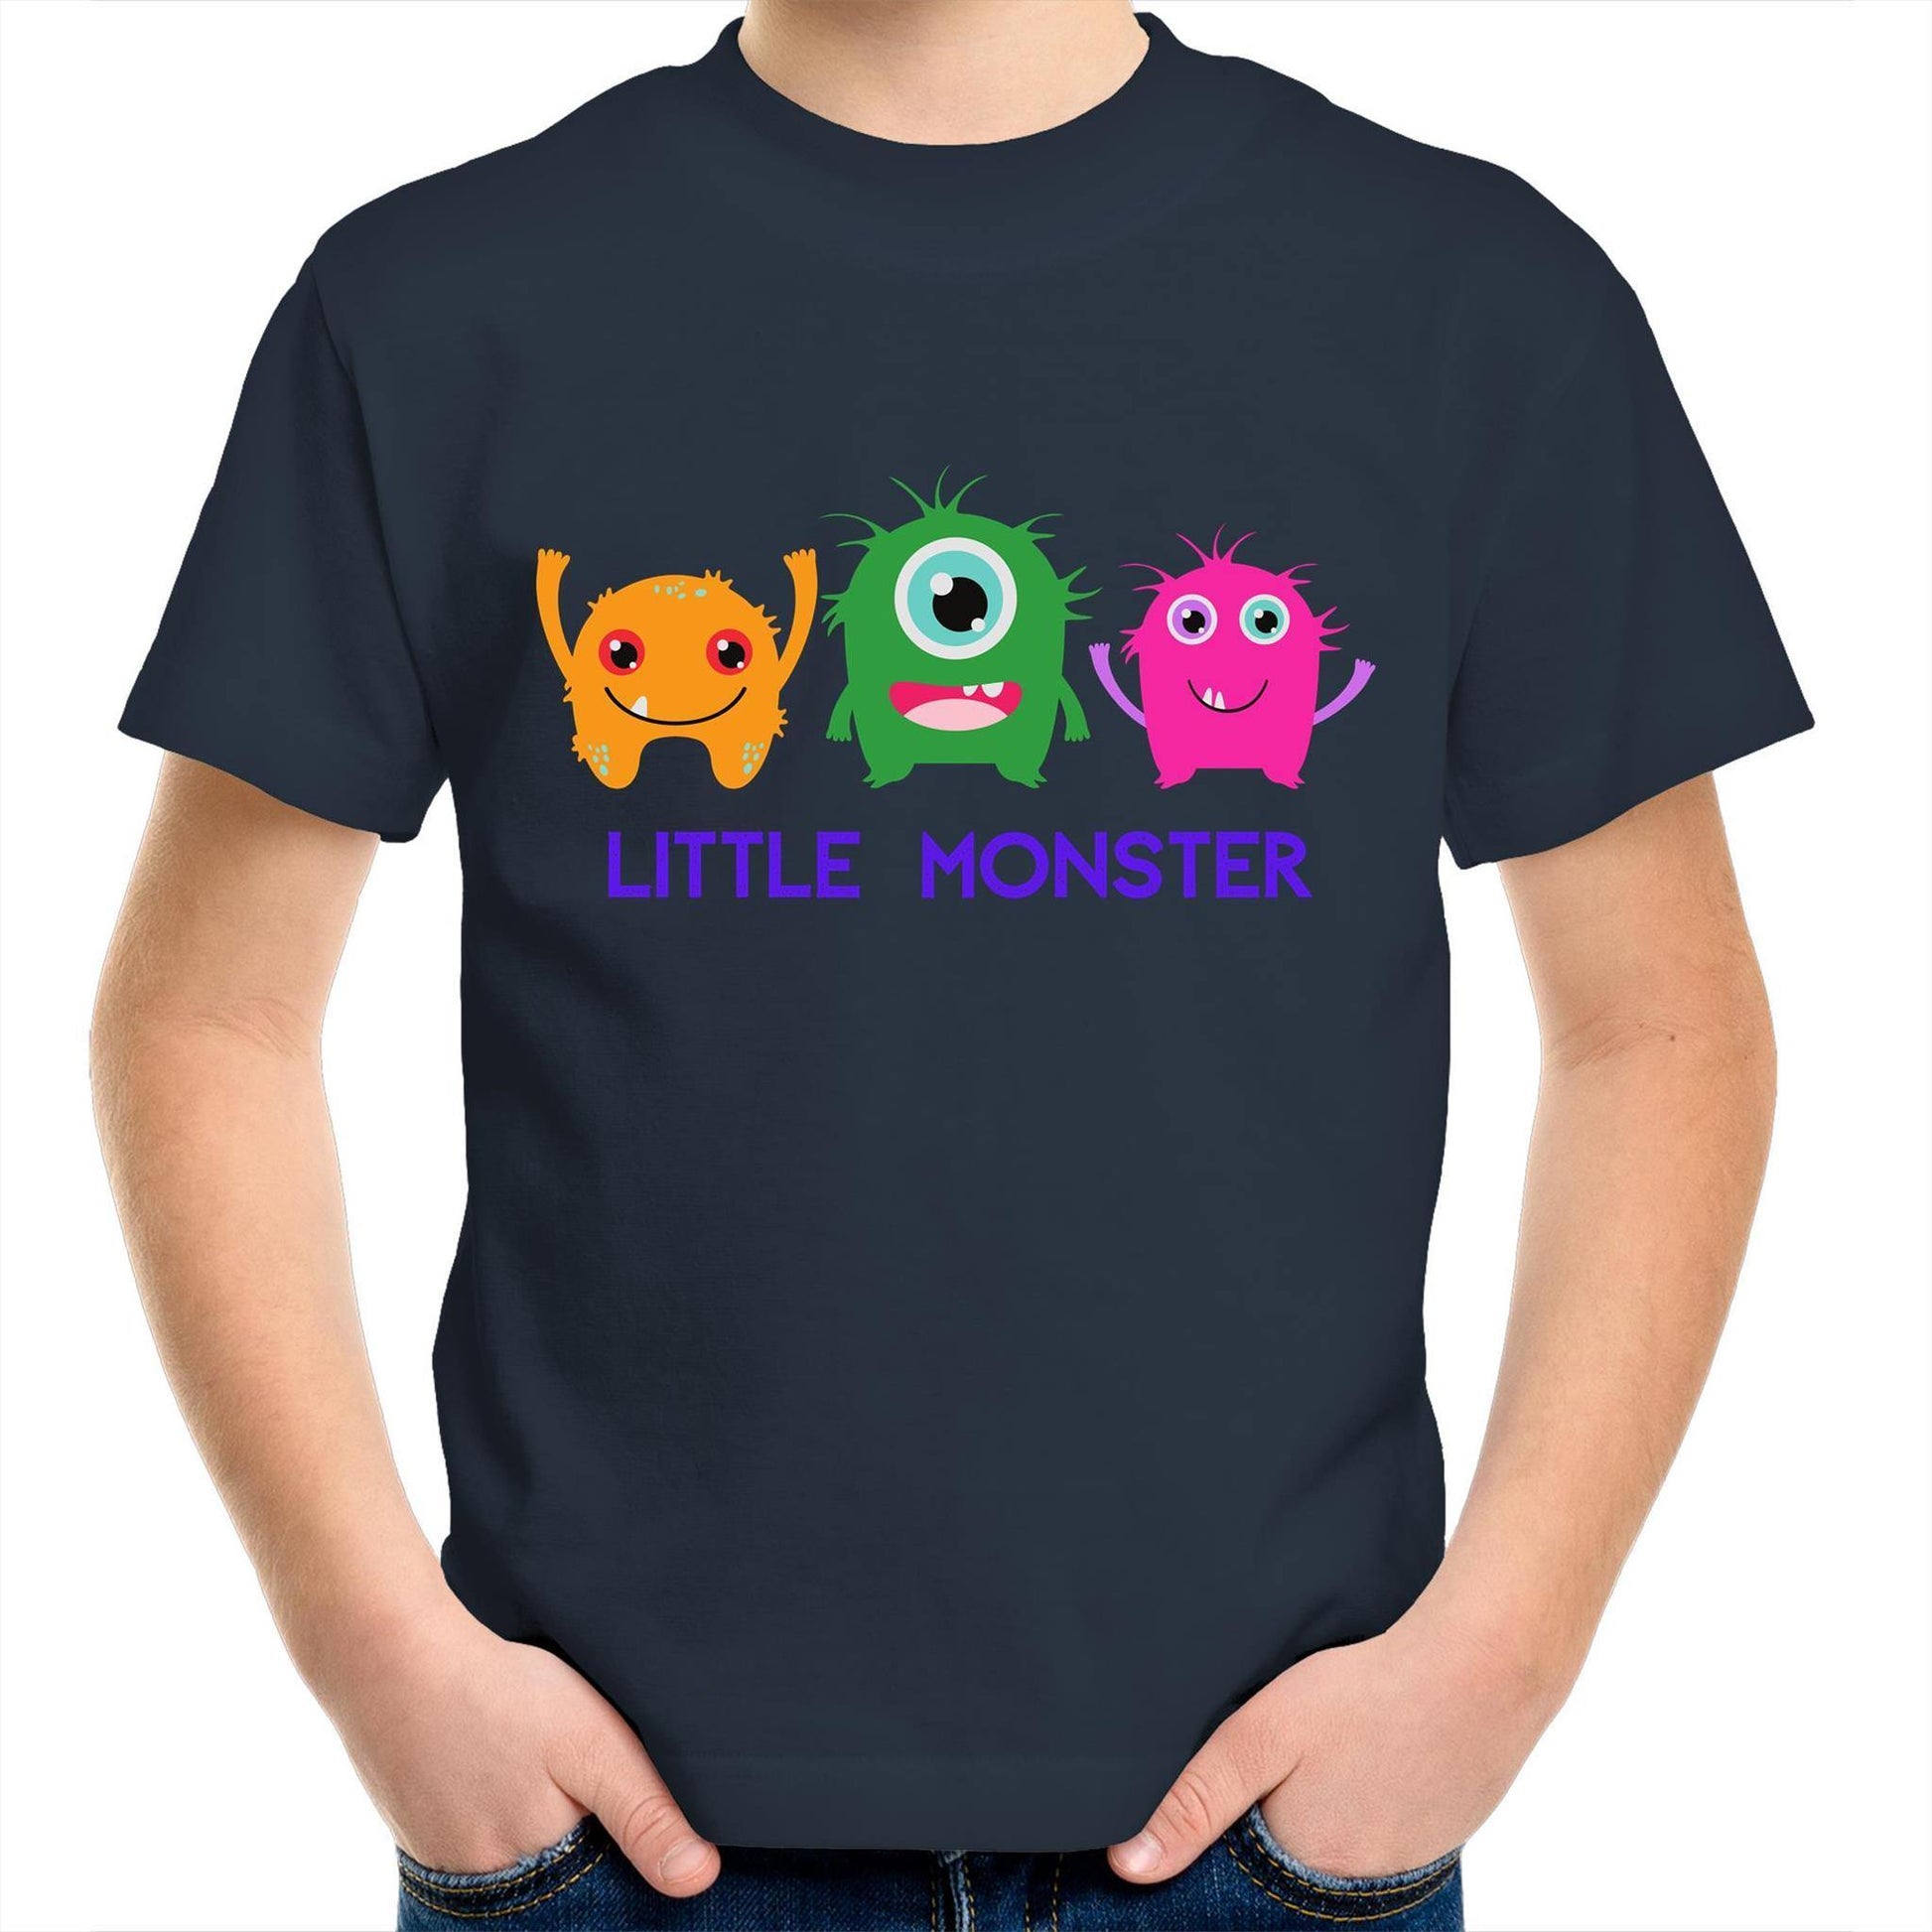 Little Monster - Kids Youth Crew T-Shirt Navy Kids Youth T-shirt Funny Sci Fi